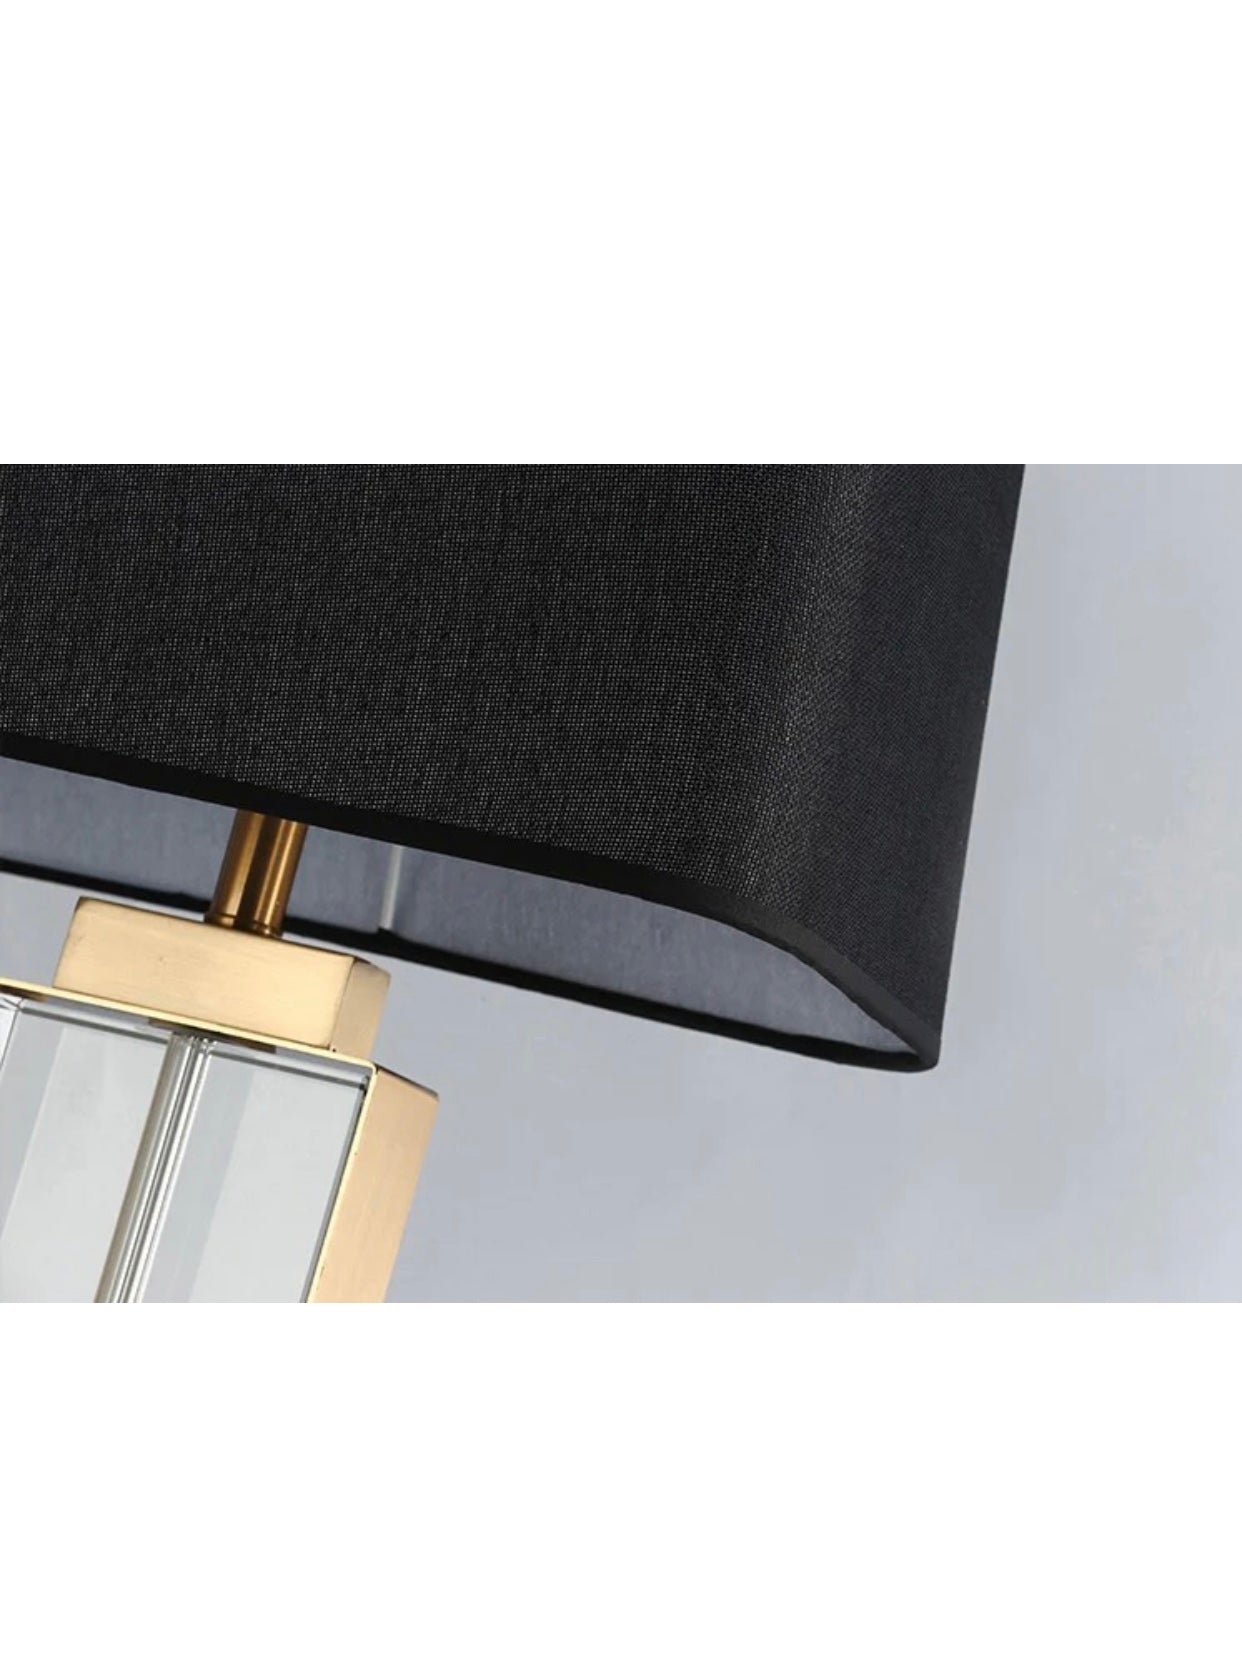 AvaMalis A|M Lightning Table Lamp in Lead Crystal with Aged Brass Accents.